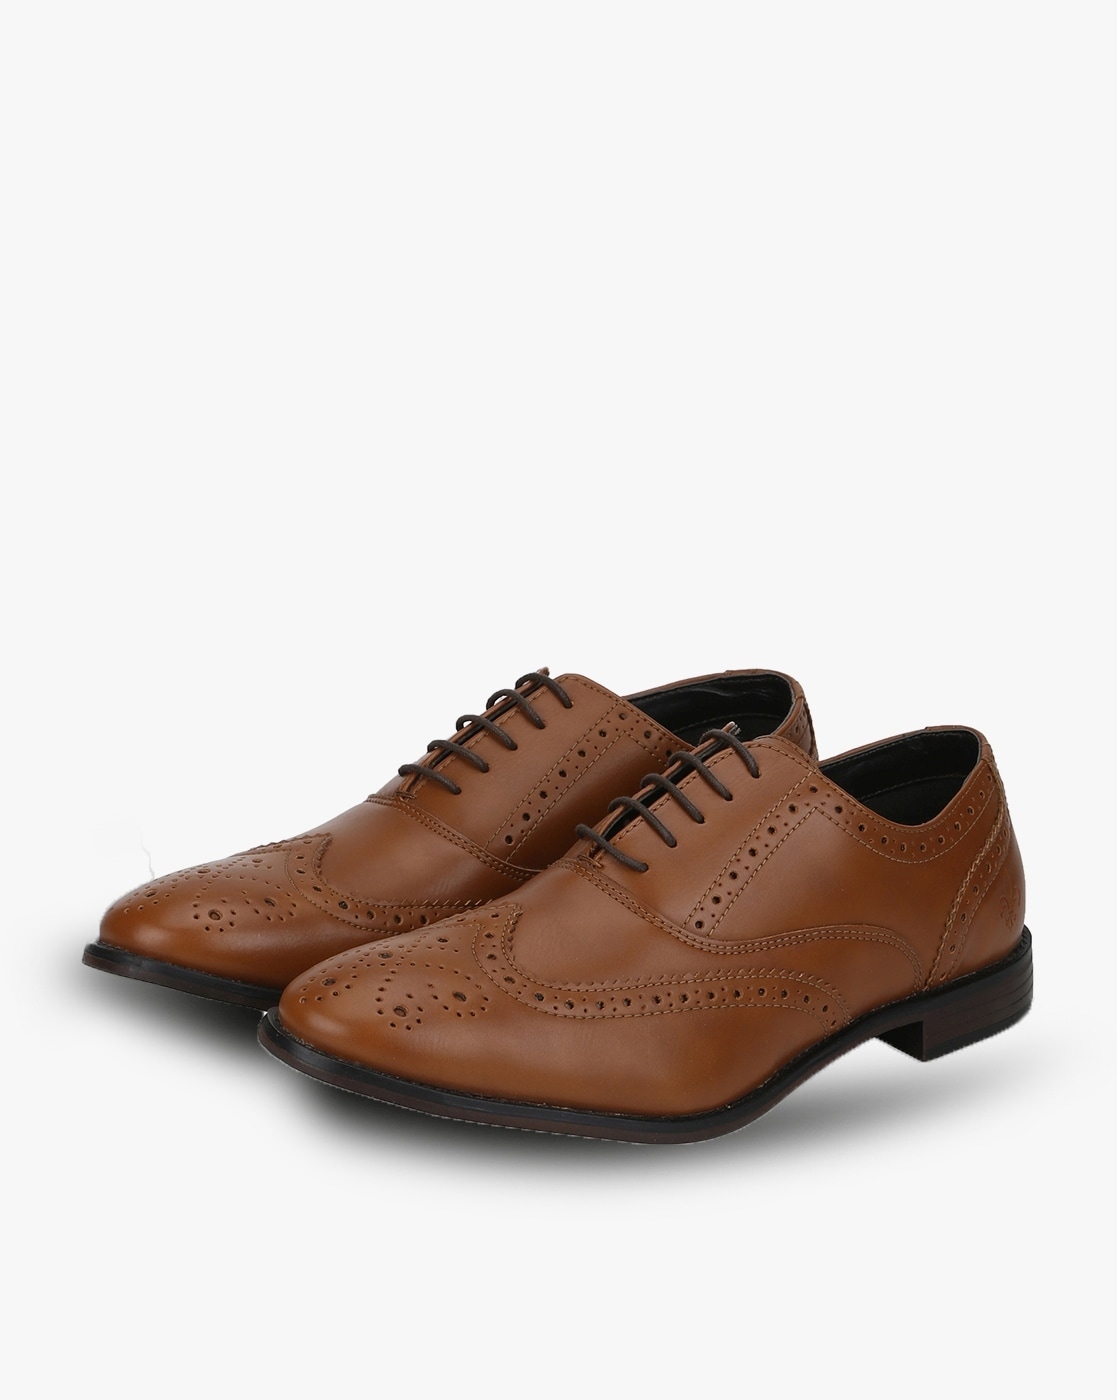 bond street leather shoes